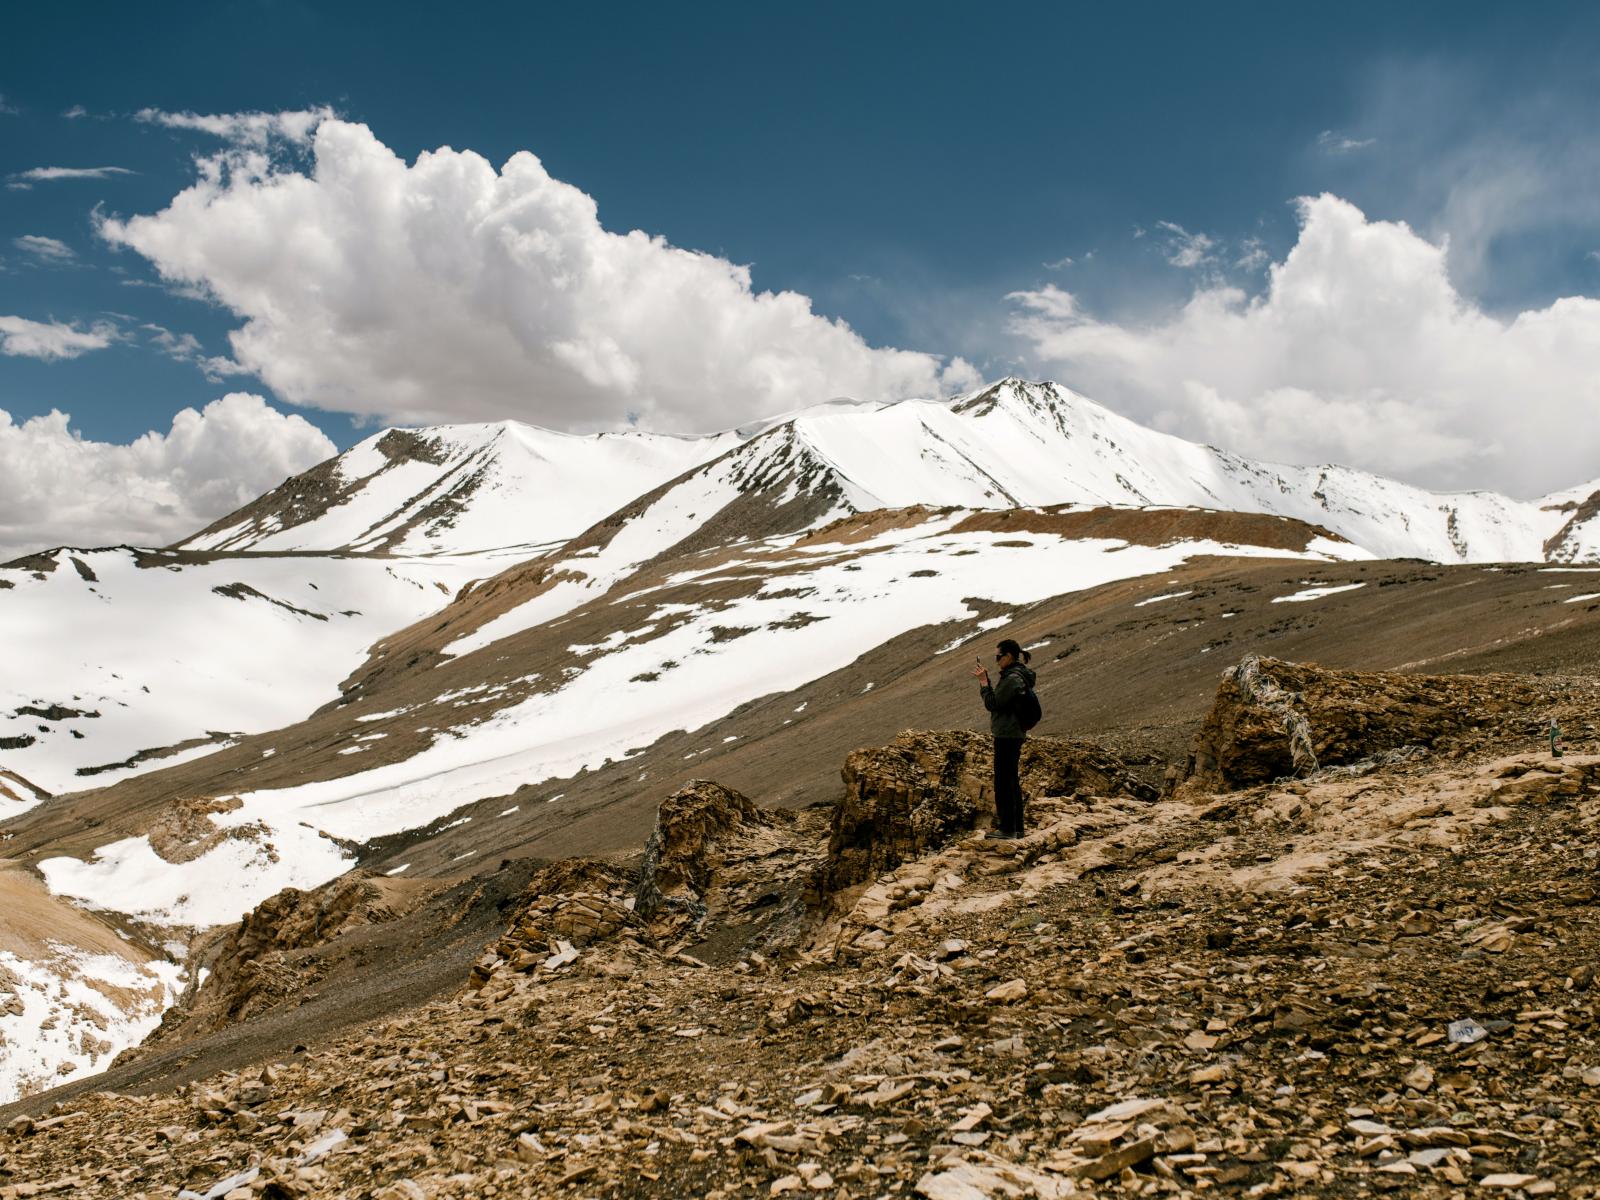 Photo of a person standing on top of mountain. There are scattered patches of snow behind them.